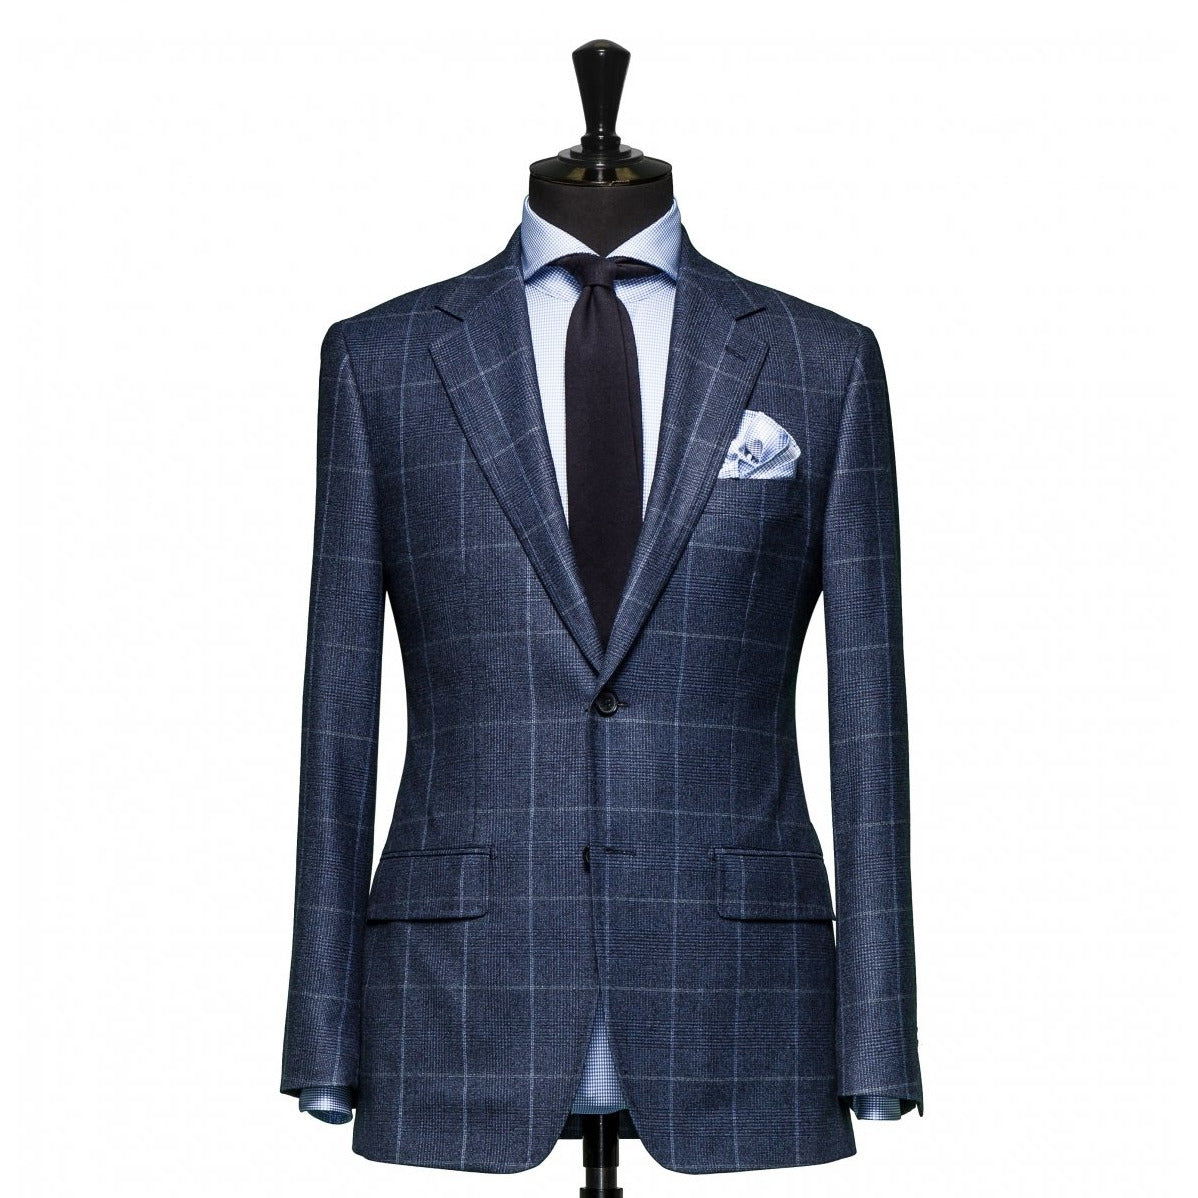 Made to Measure Suit Various Premium Cloth - Suit by Urbbana